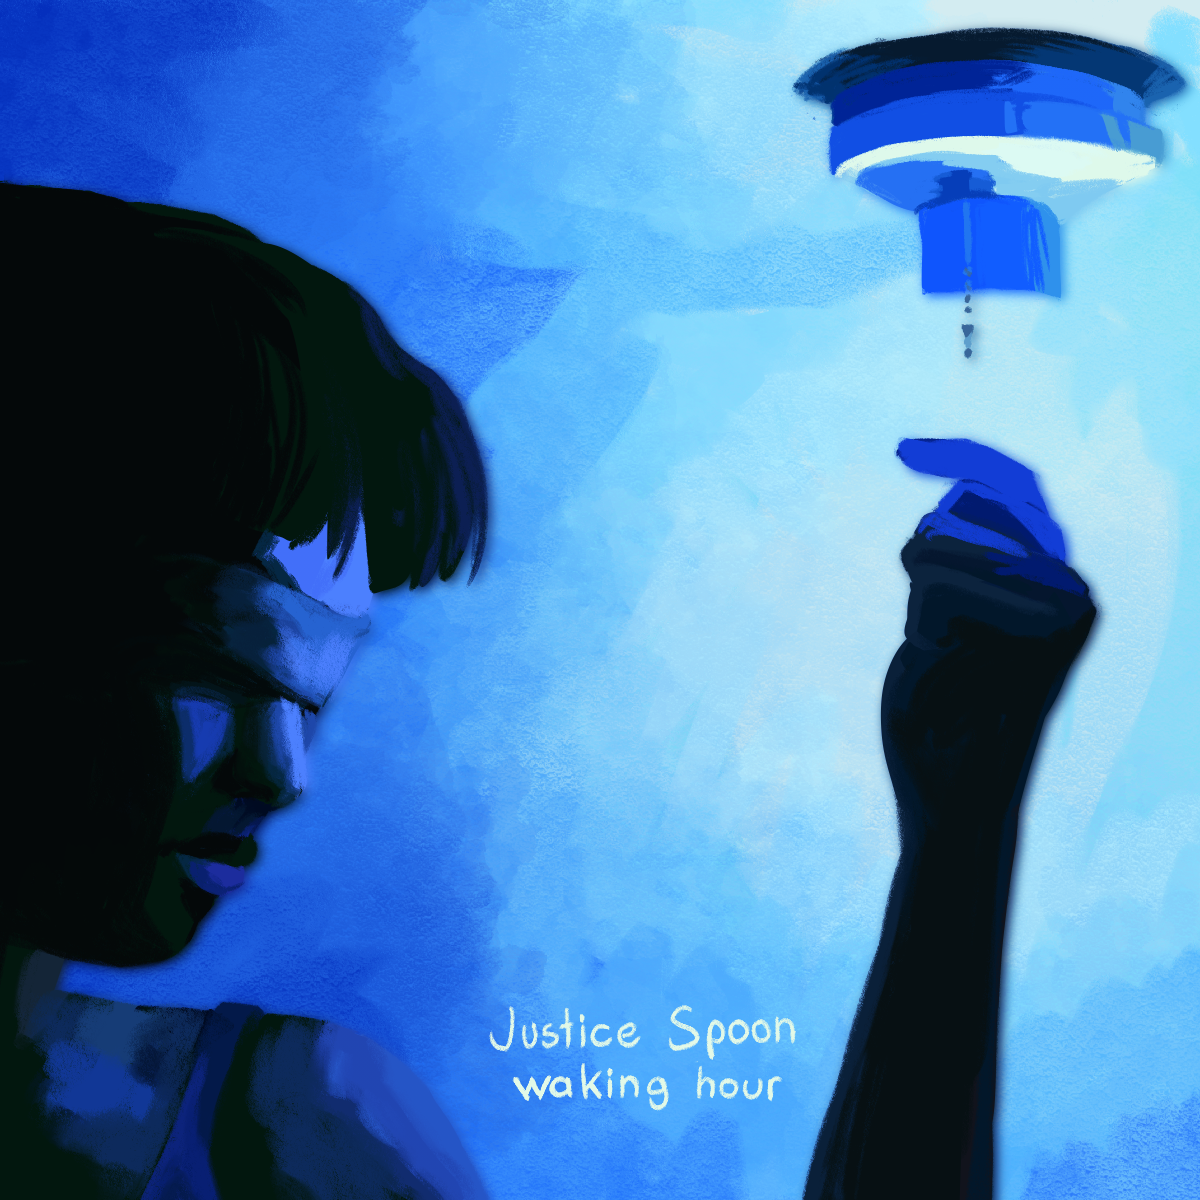 A digital drawing of Justice Spoon from the game Blaseball. They are facing a light attached to the ceiling, pulling the string that turns it on. The picture is colored in shades of blue, like Vienna Teng's Waking Hour album cover.